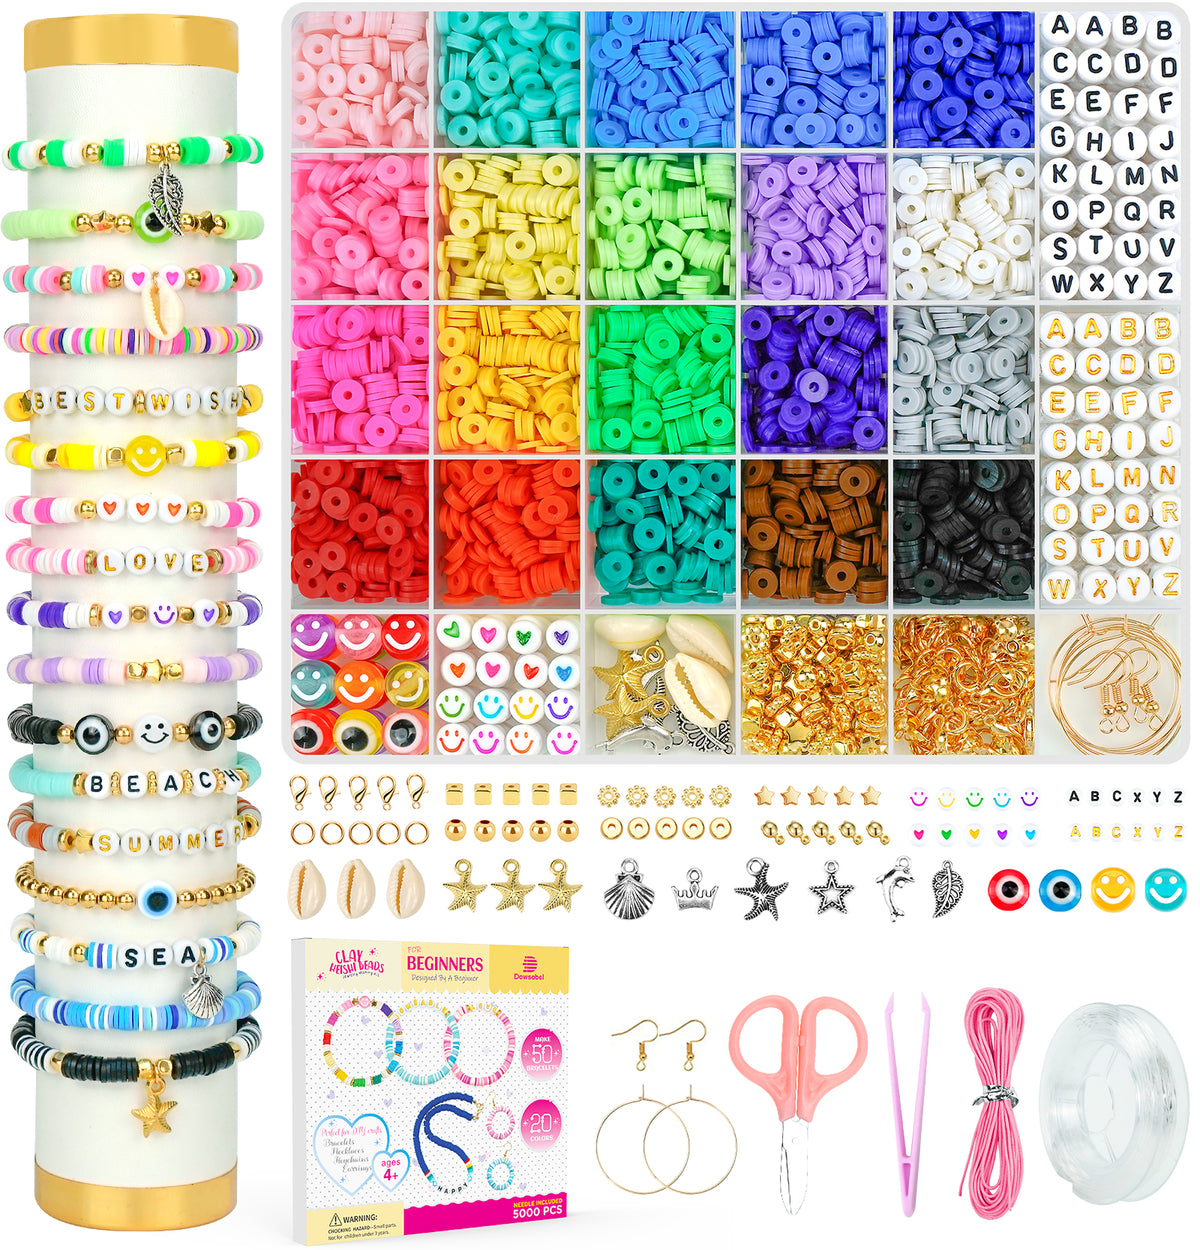 Dowsabel Bracelet Making Kit, 48 Colors Pony Beads Friendship Bracelet Kit  Letter Beads Heart Beads for Jewelry Making, DIY Arts and Crafts Gifts for